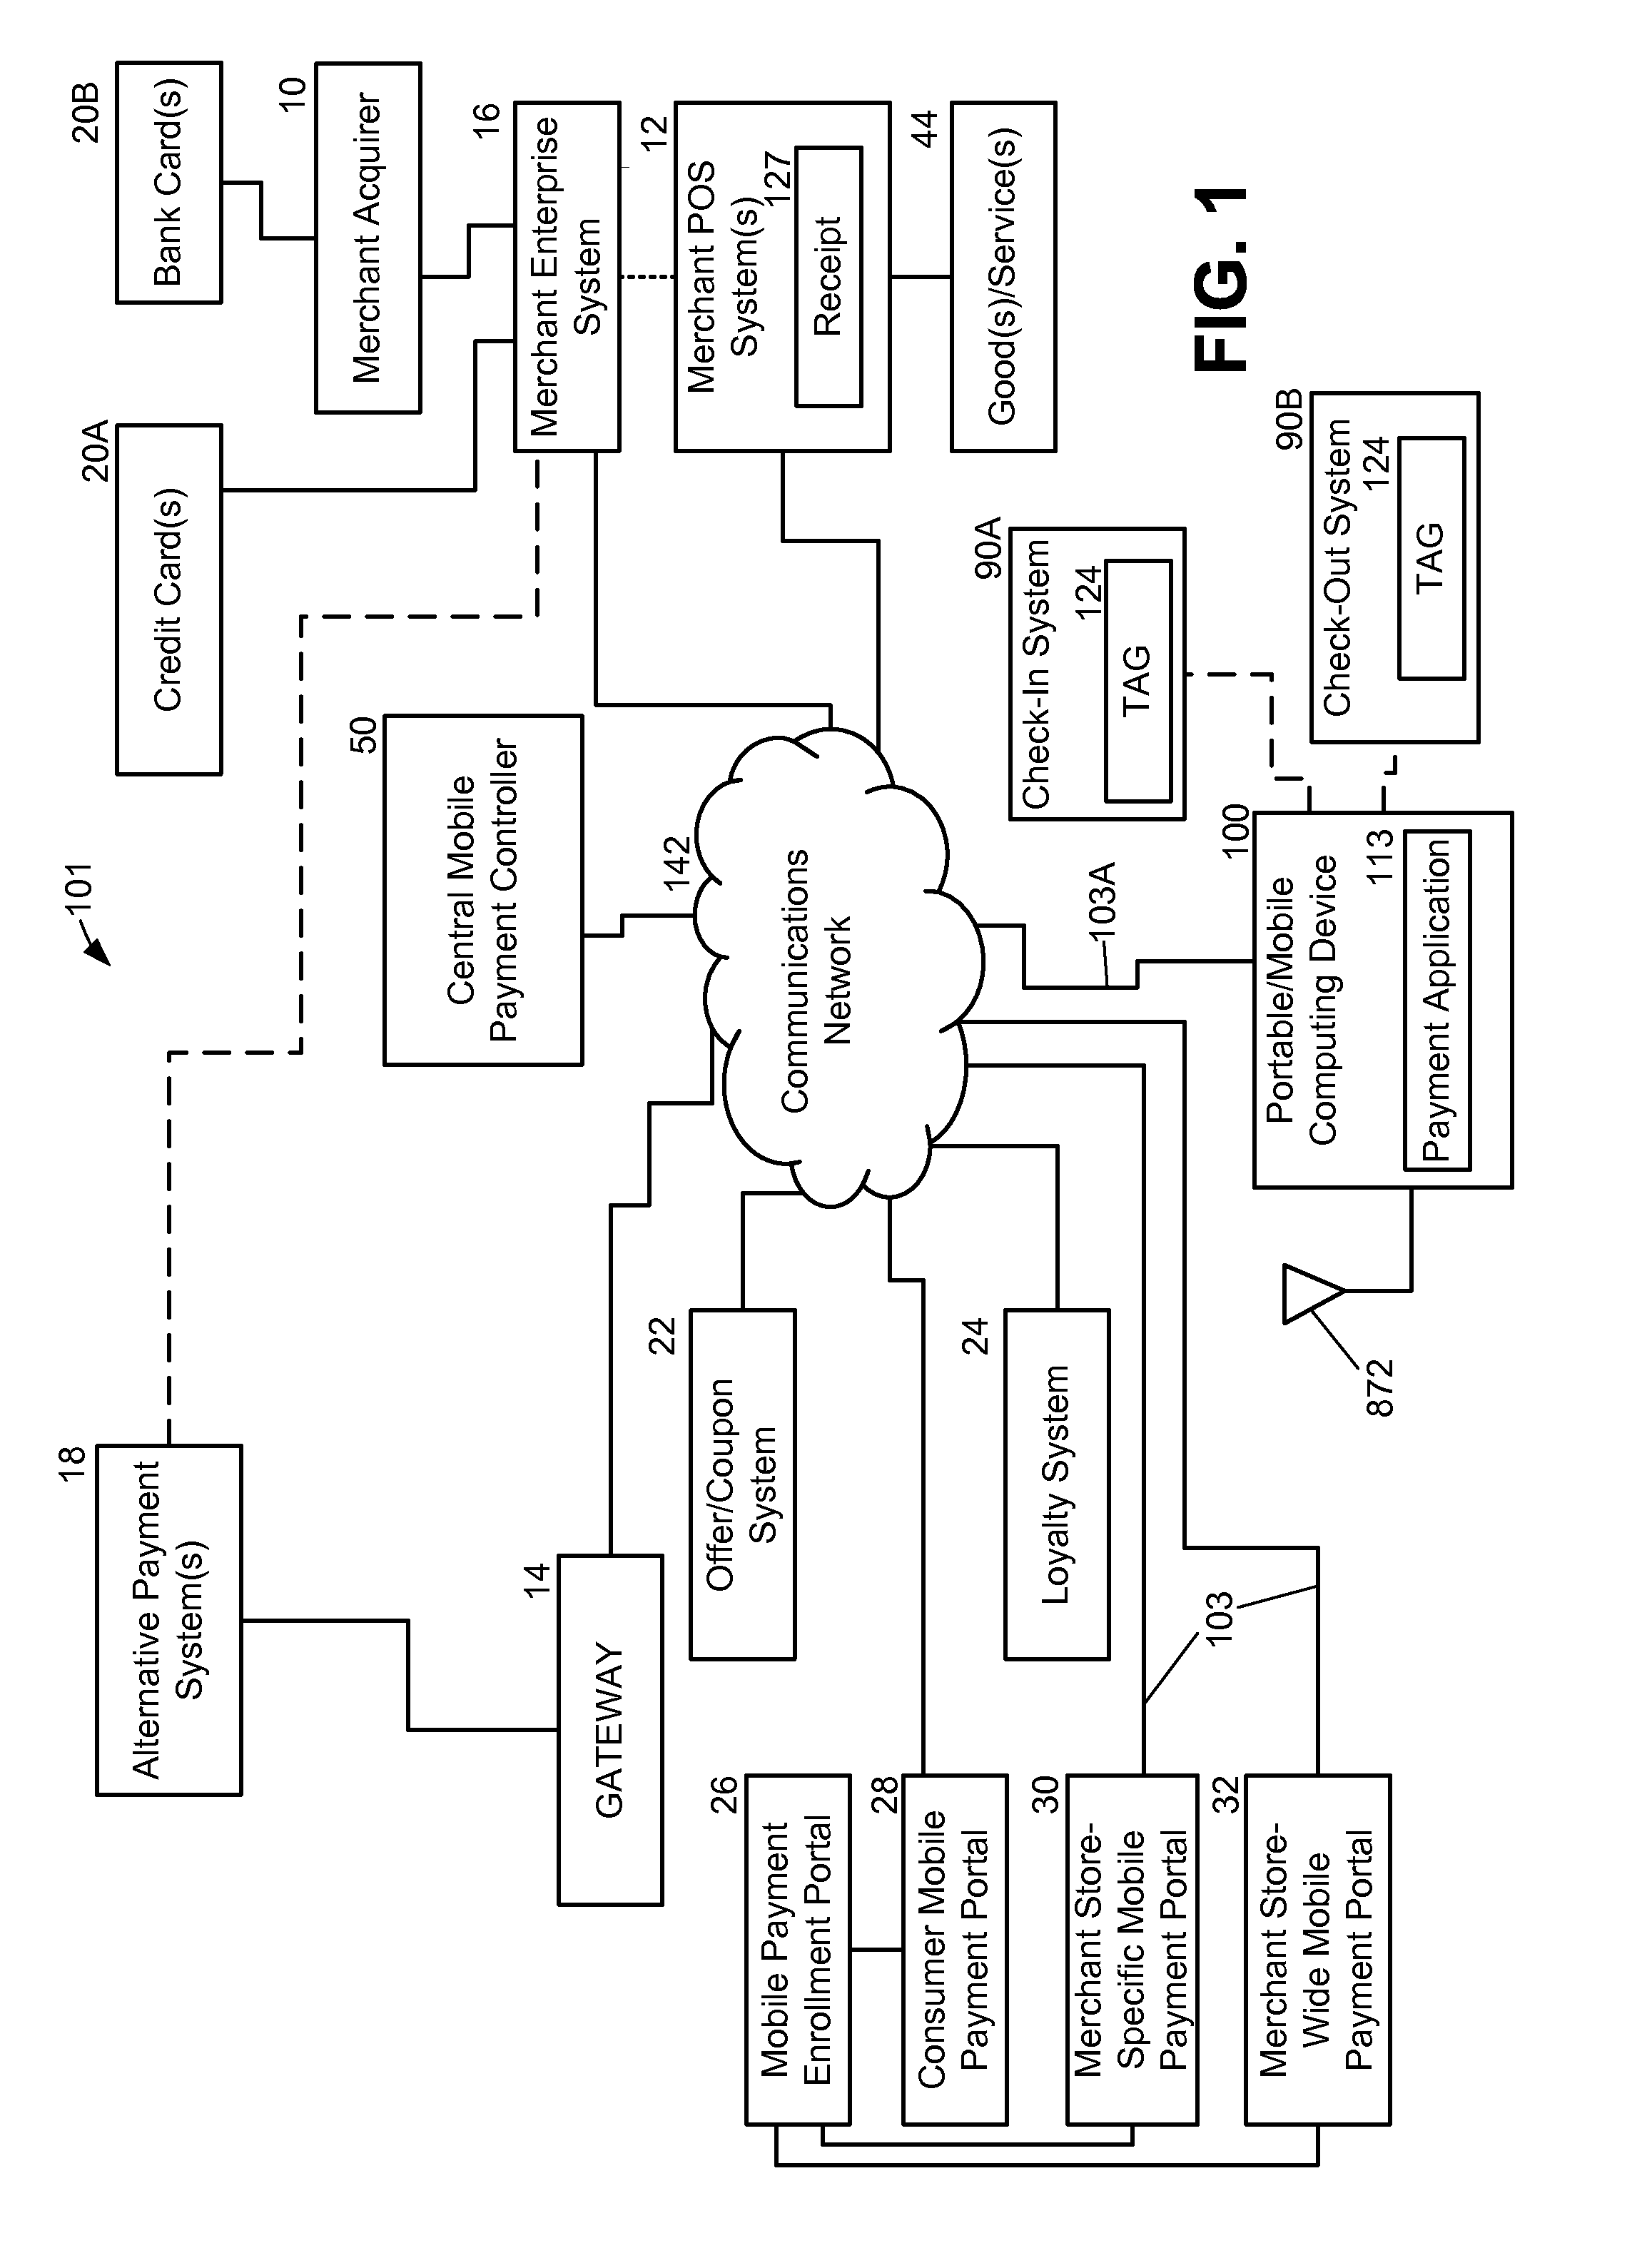 System and Method For Managing Transactions With A Portable Computing Device